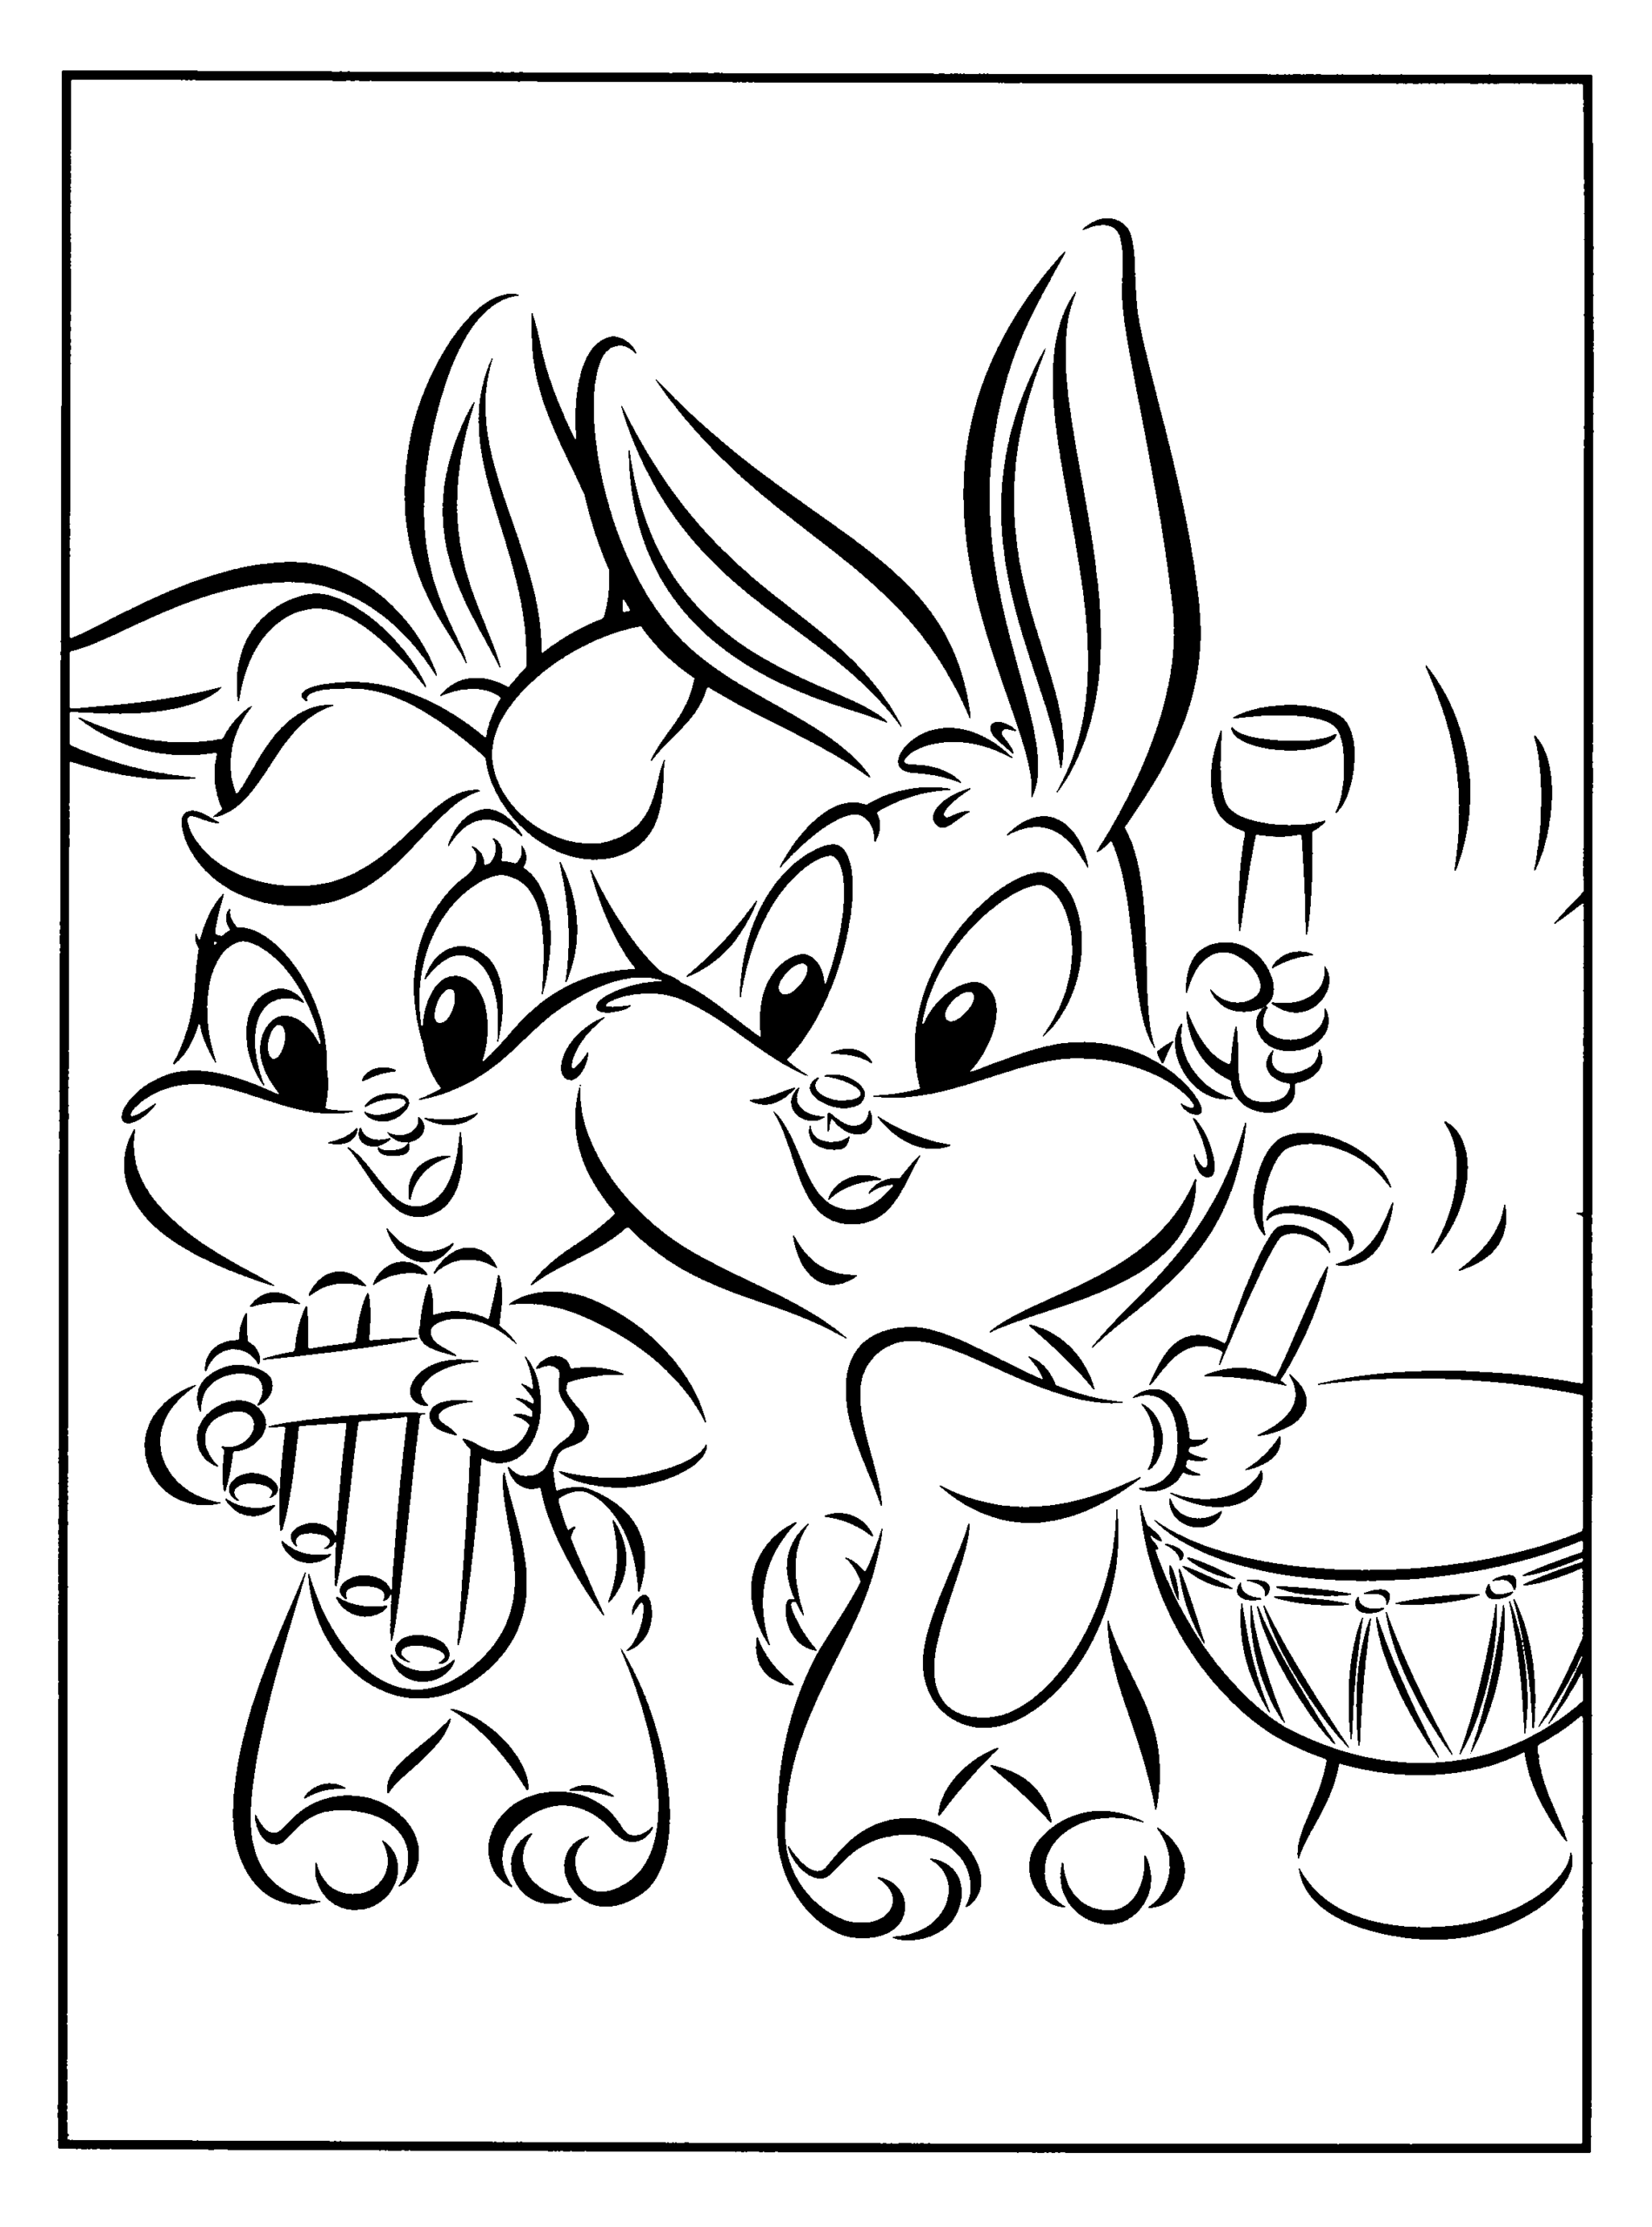 Looney Tunes Coloring Pages TV Film looney tunes 19 Printable 2020 04585 Coloring4free